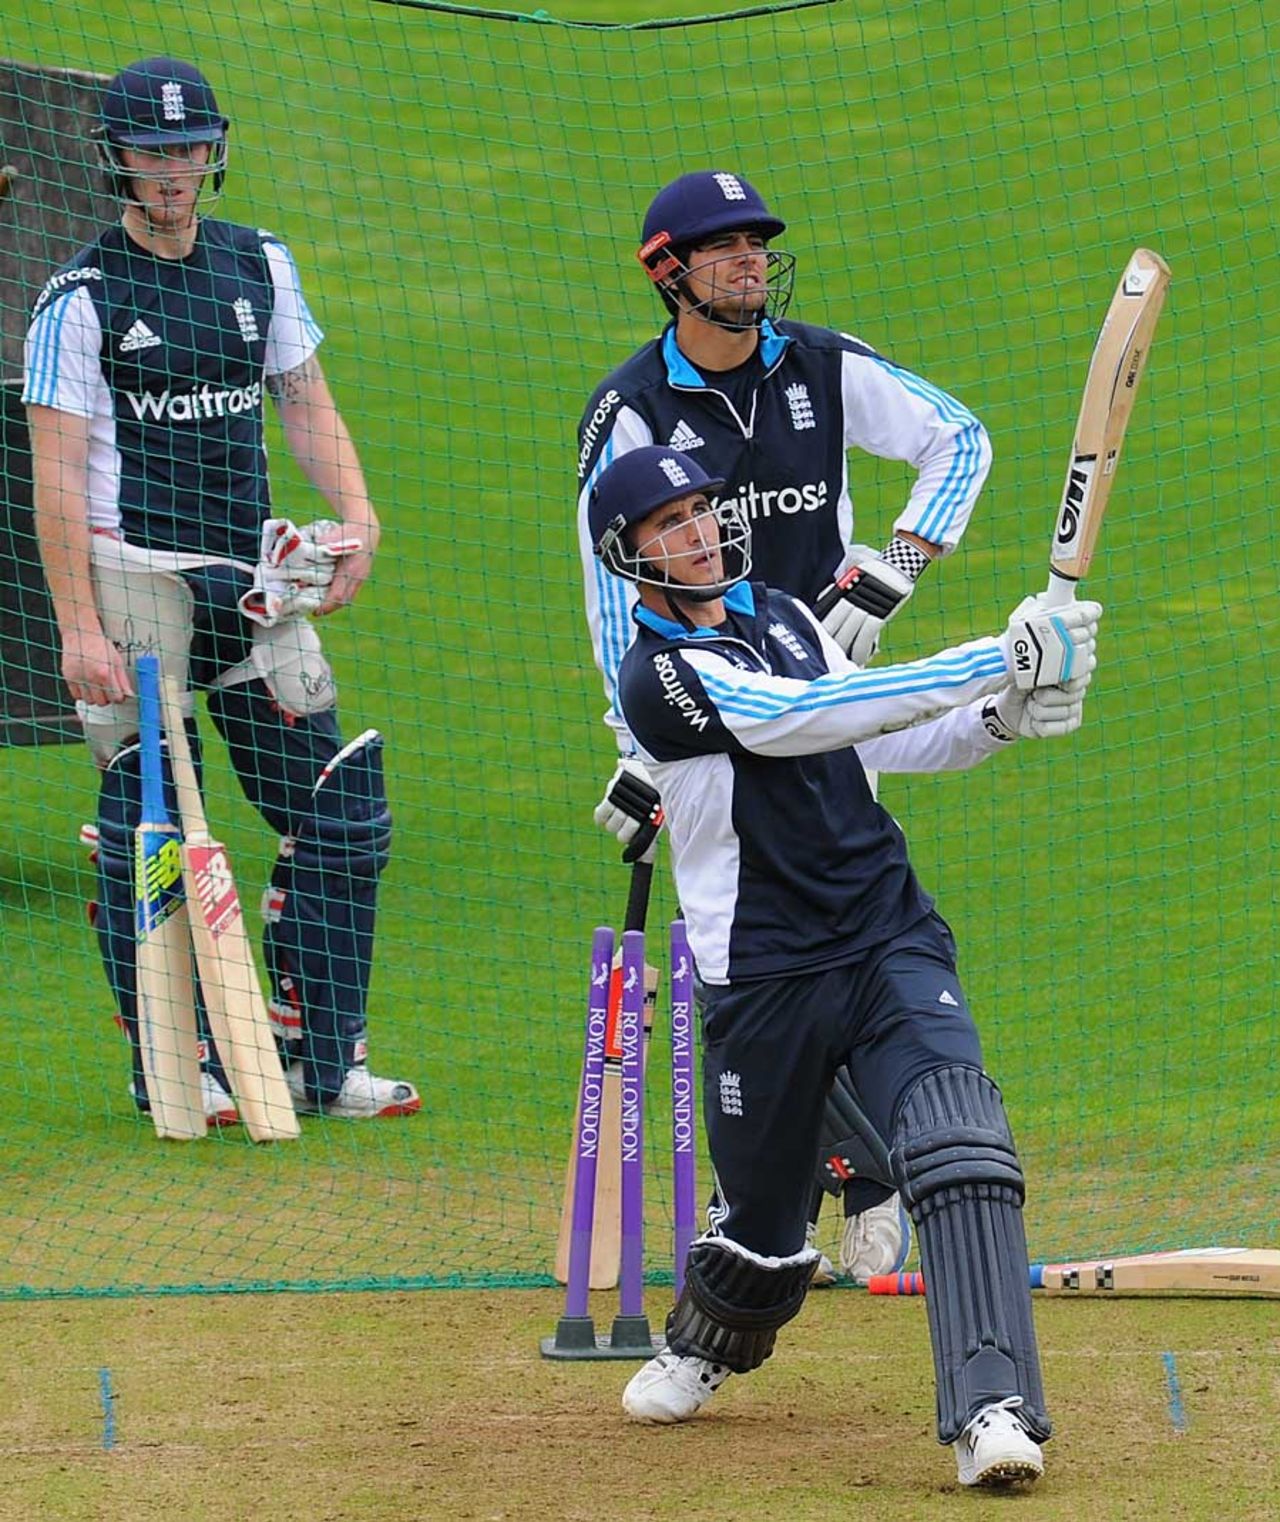 Alex Hales launches one out of the nets, Cardiff, August 26, 2014